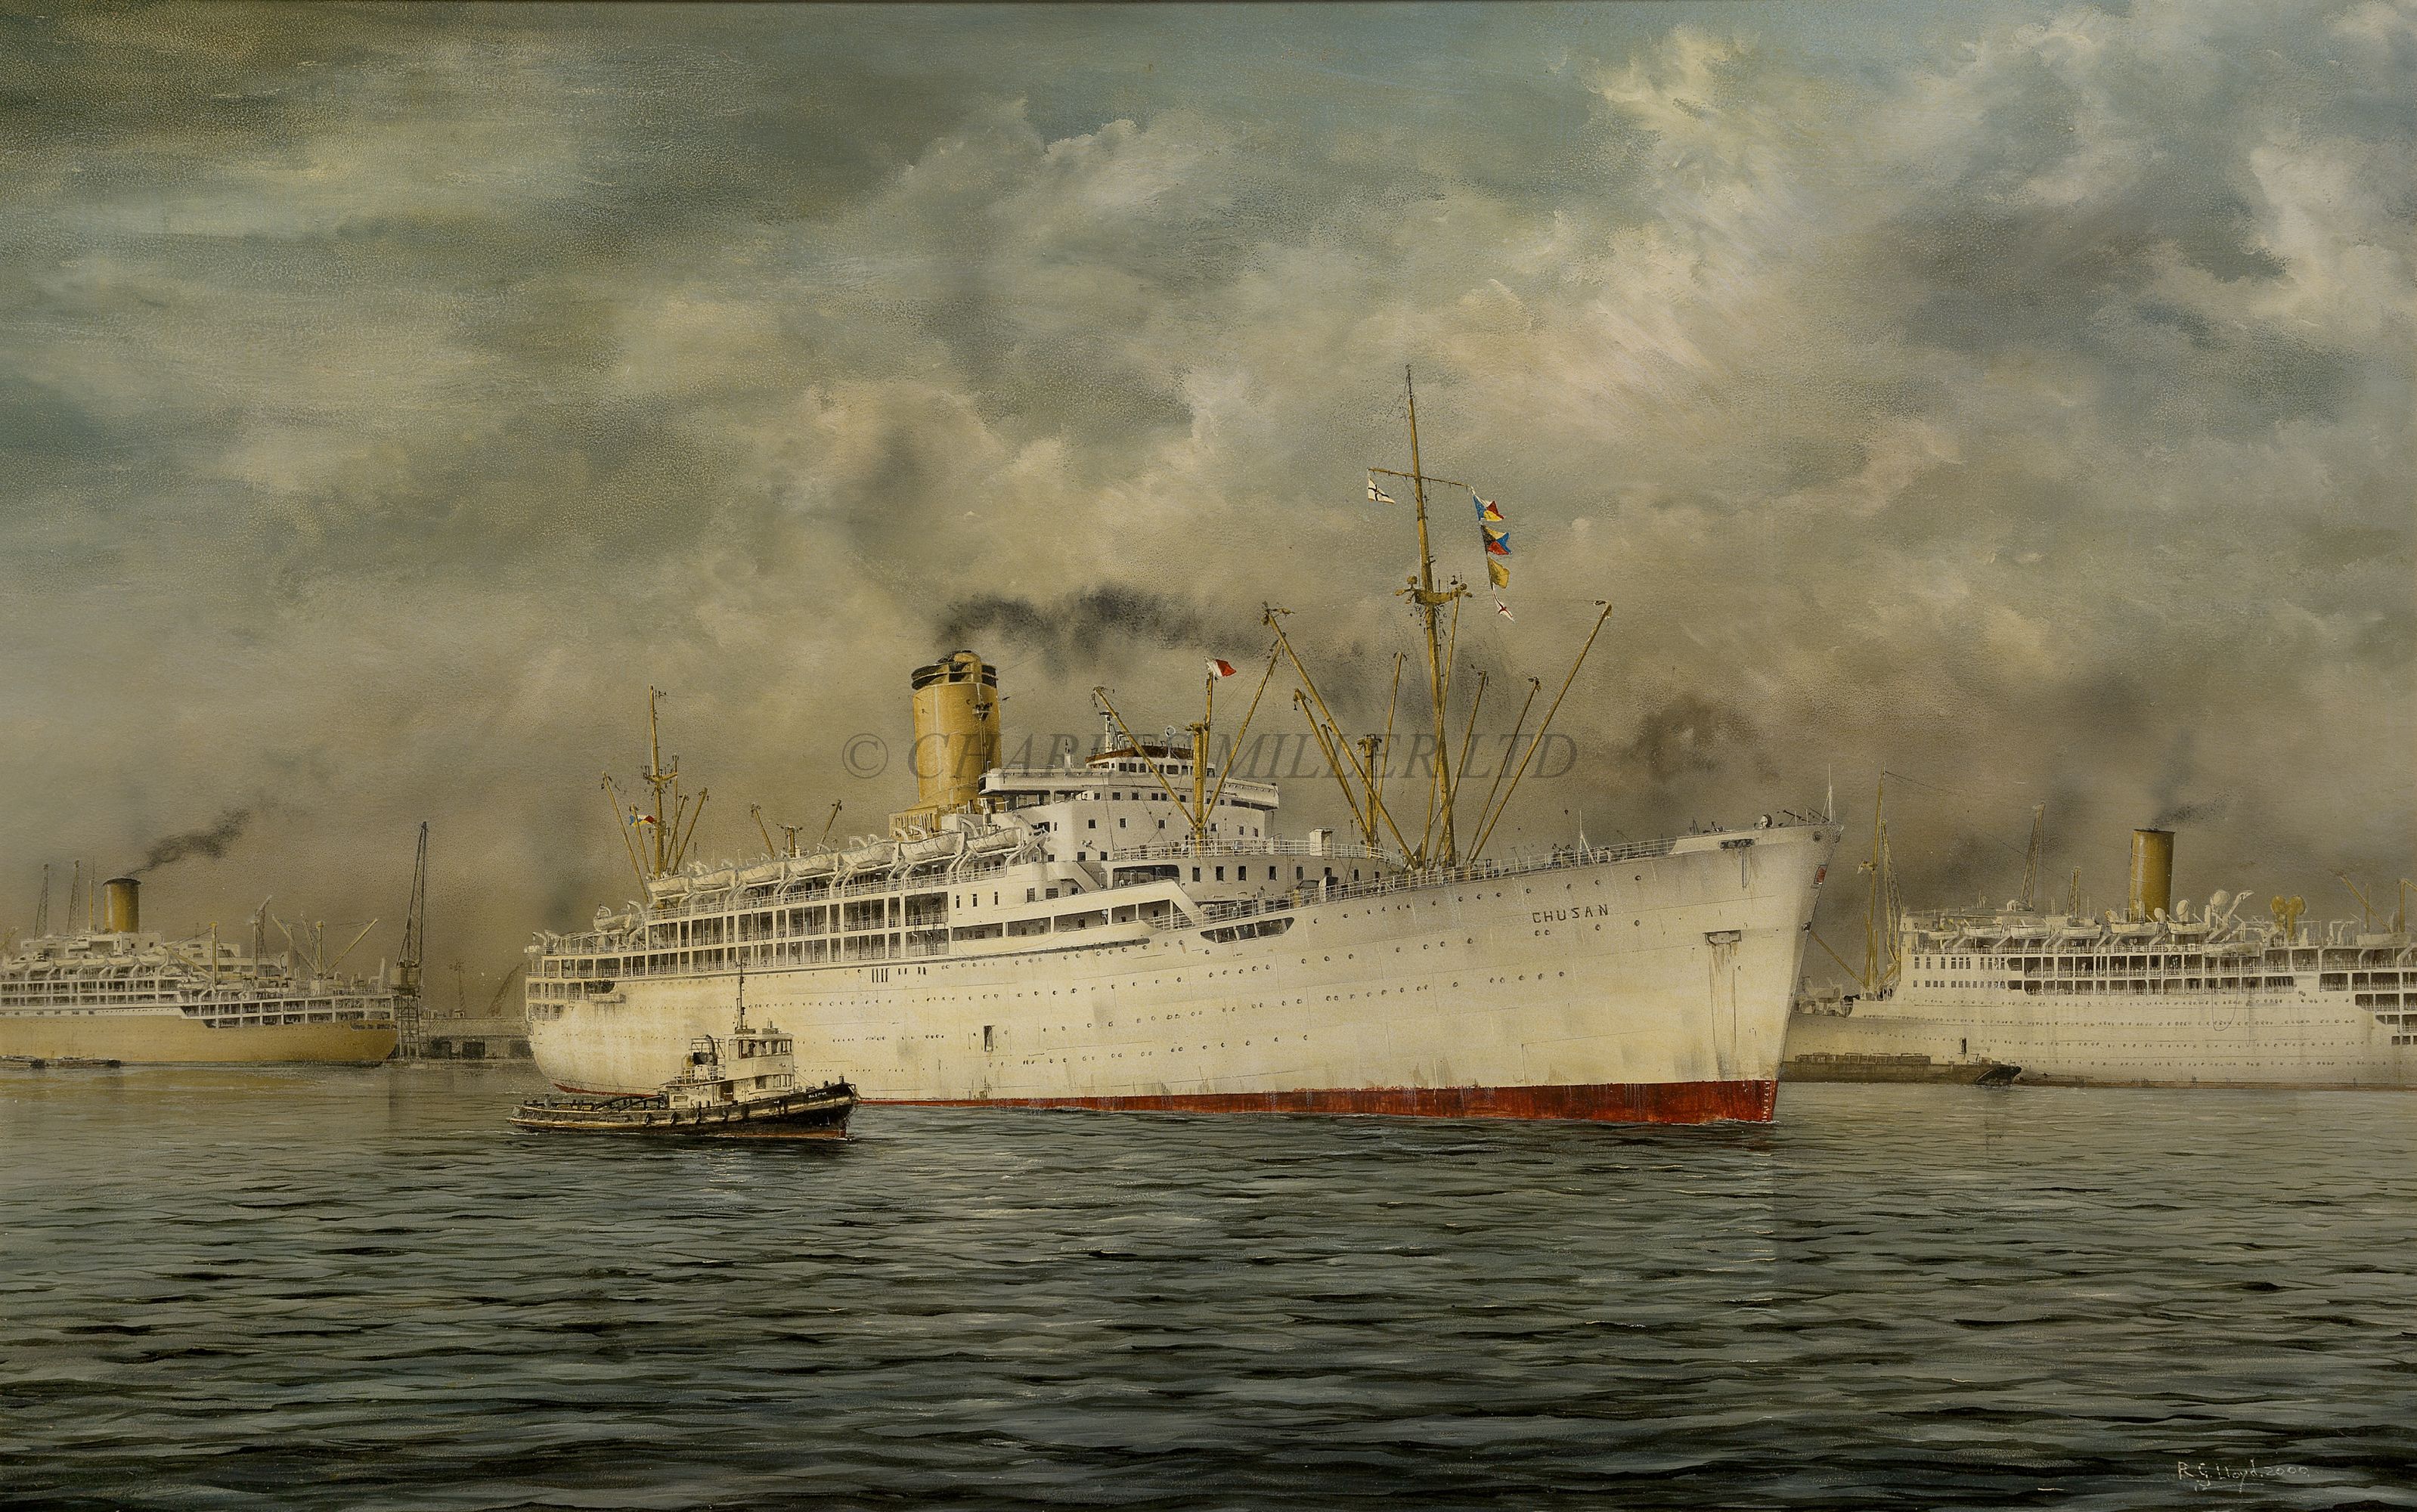 δ ROBERT G. LLOYD (BRITISH, B. 1969) - THE P&O LINER S.S. 'CHUSAN' PICTURED IN THE RIVER THAMES OFF